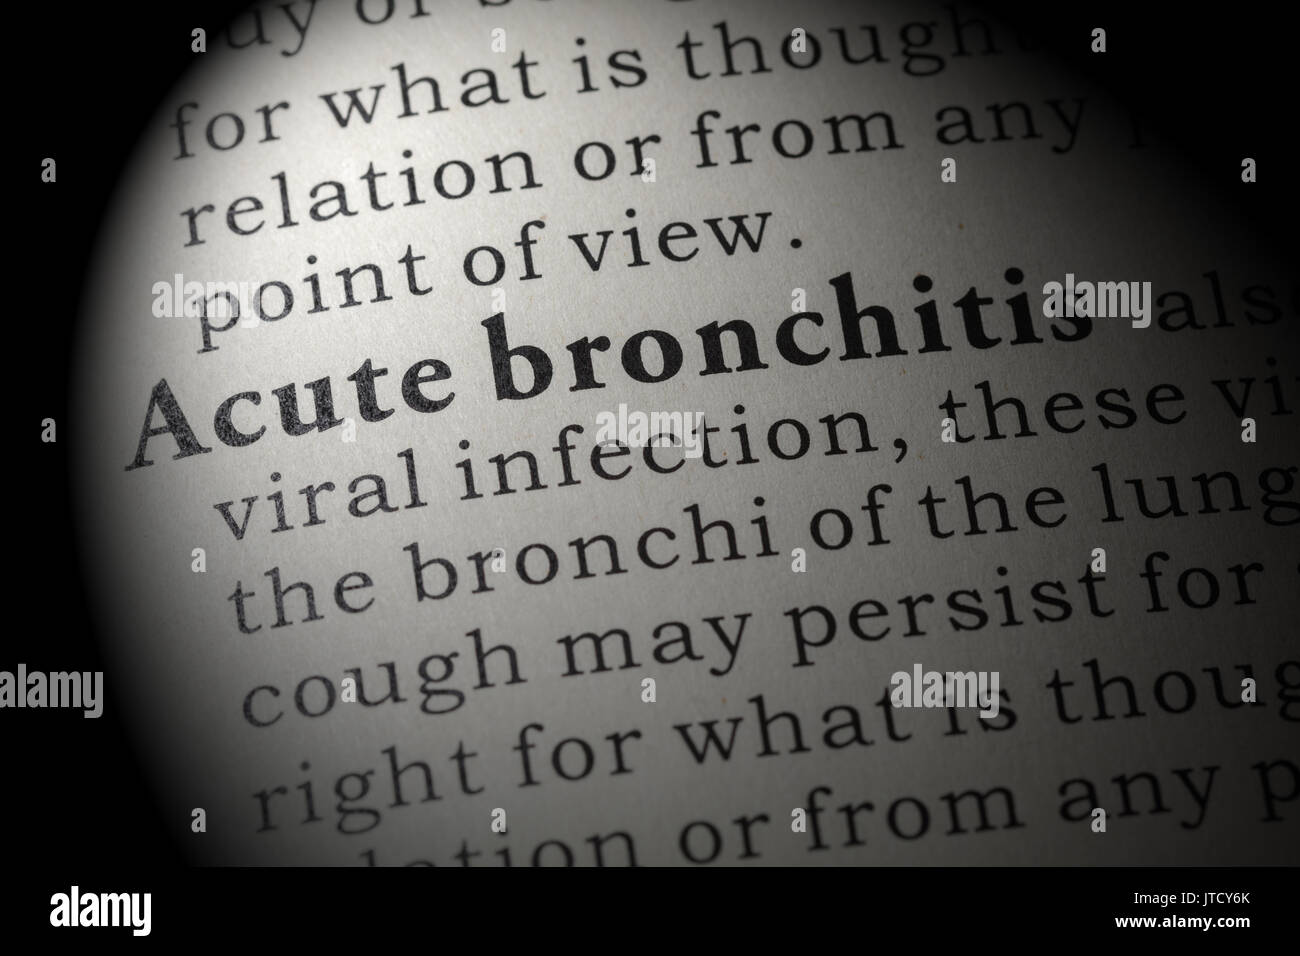 Fake Dictionary, Dictionary definition of the word Acute bronchitis. including key descriptive words. Stock Photo